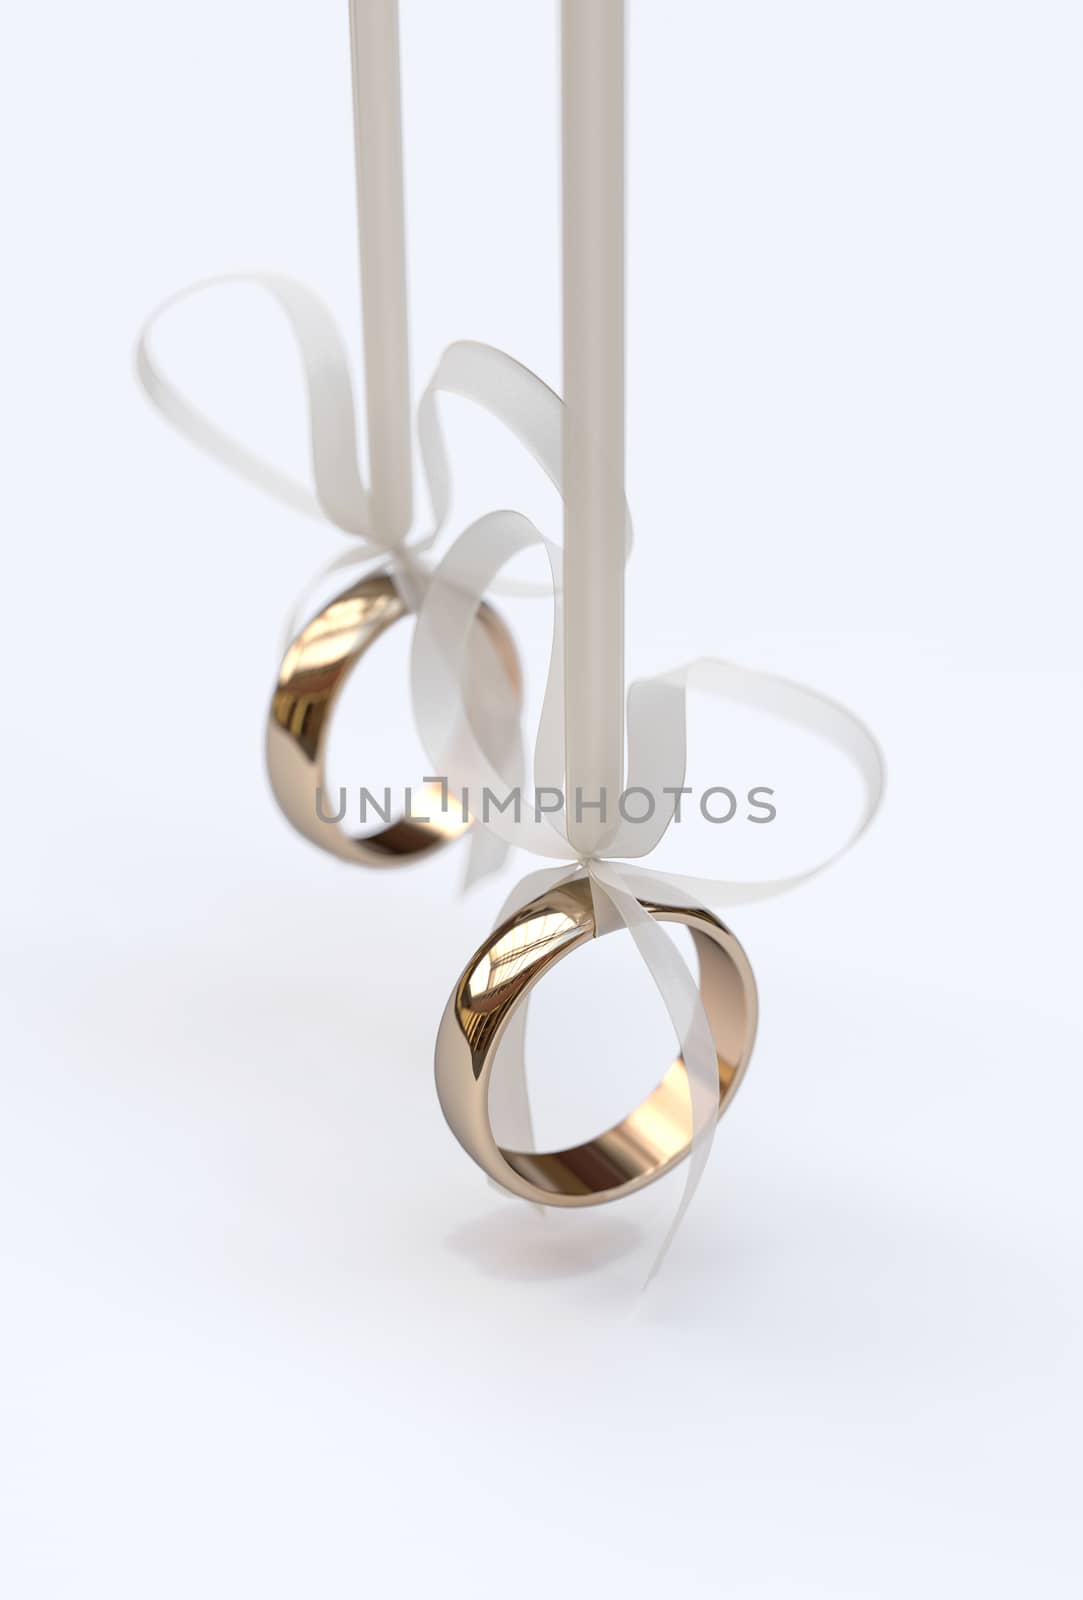 Couple of gold wedding rings with bows by Barbraford